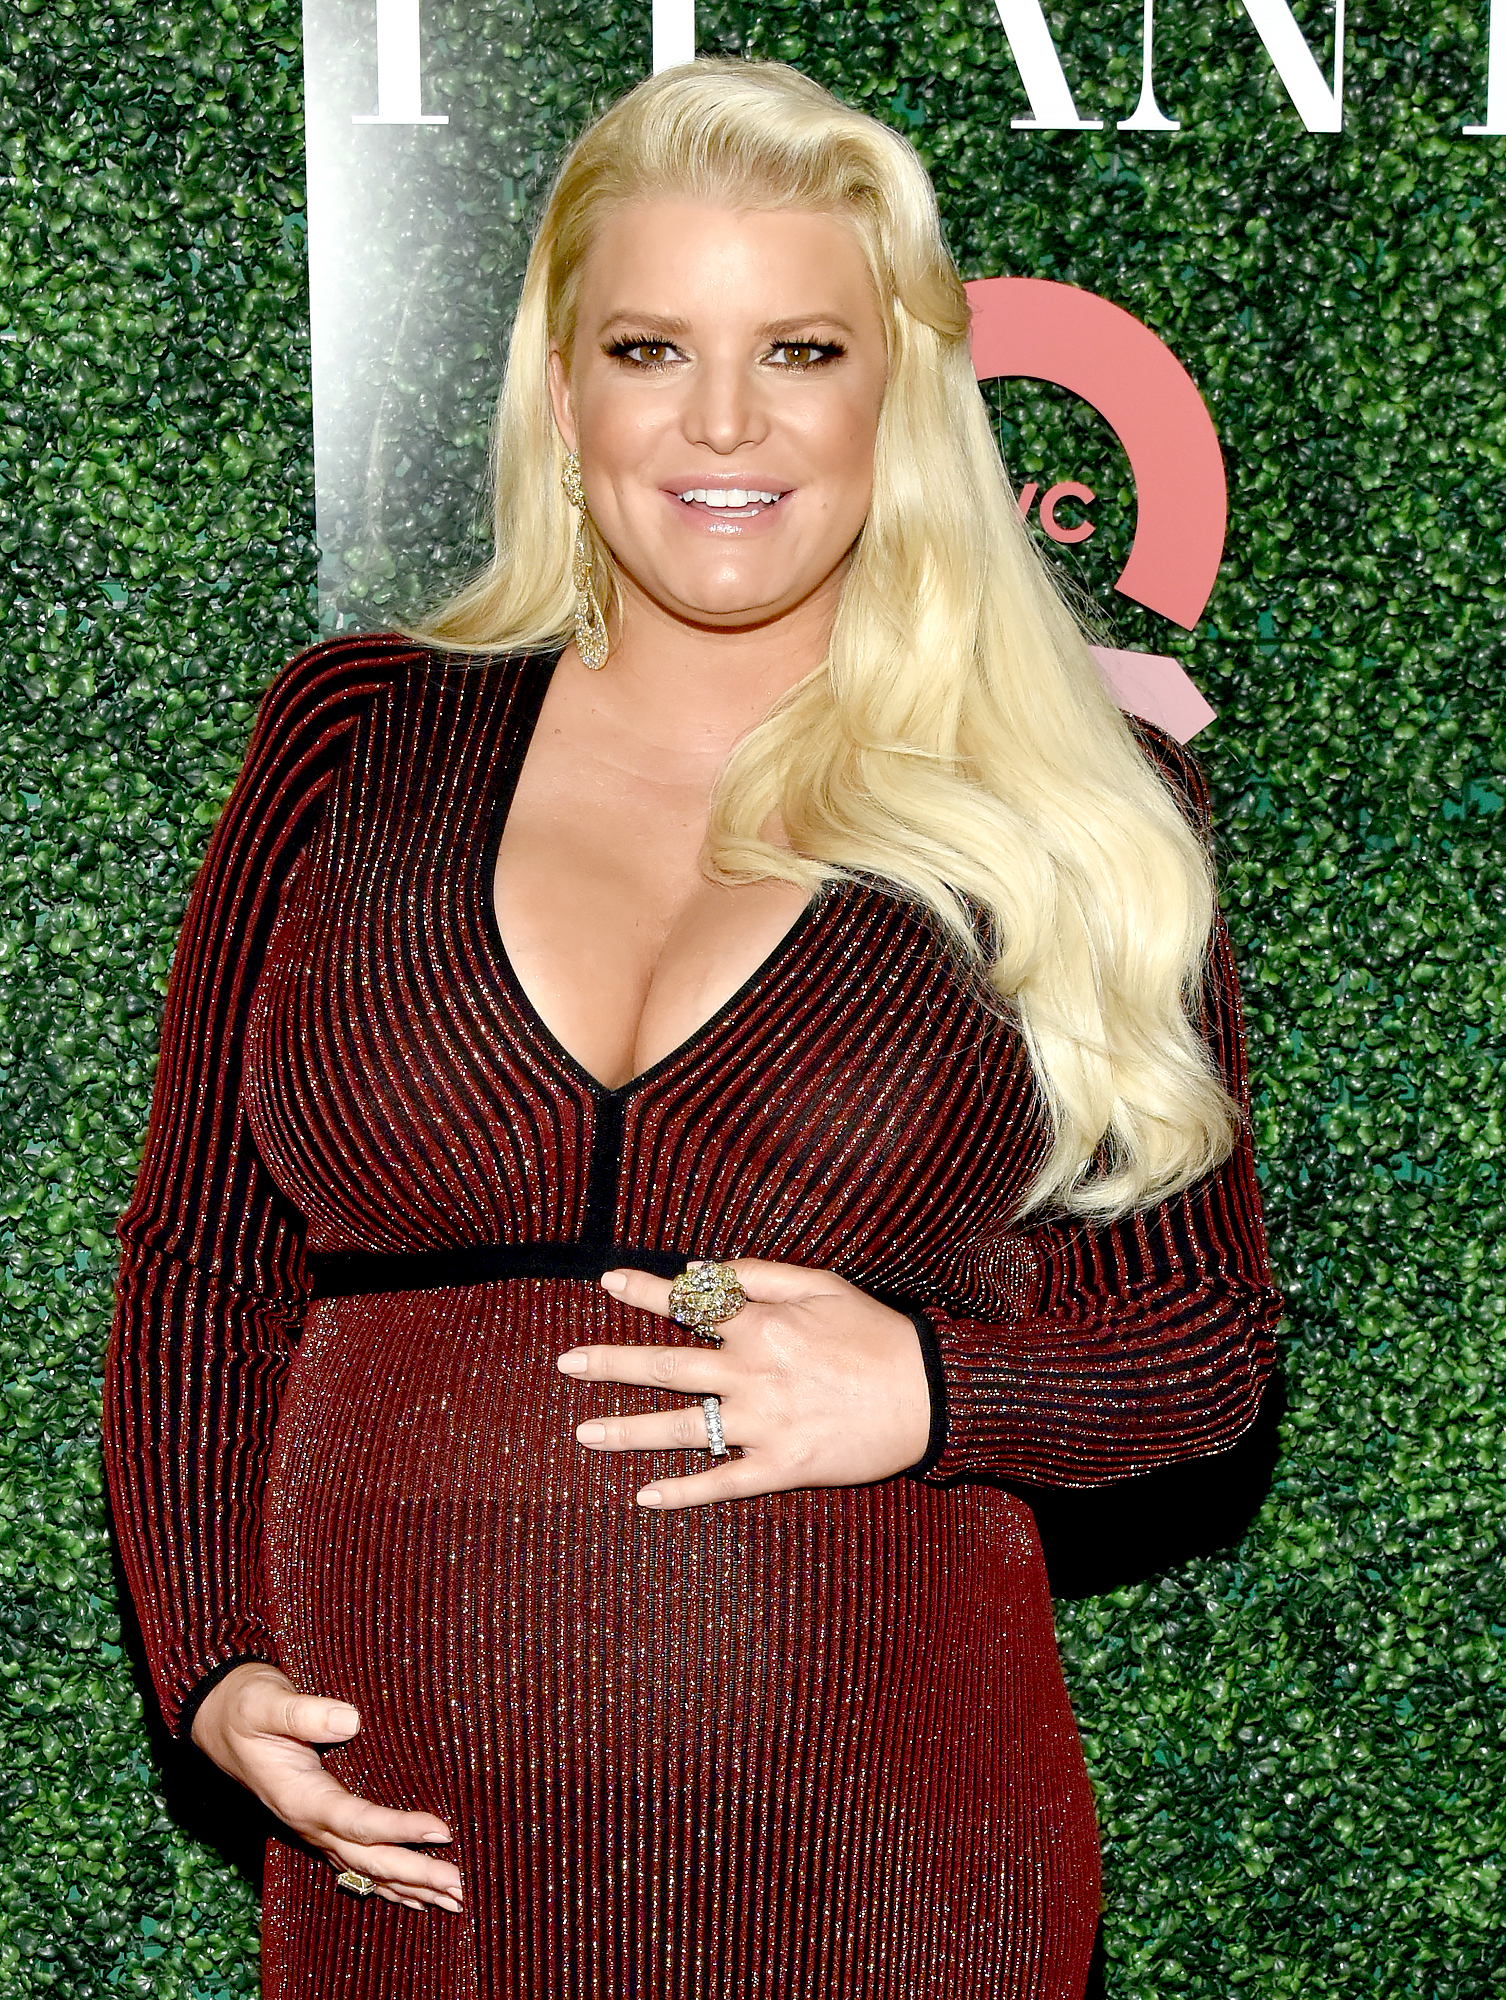 Jessica Simpson Jokes About Baby Bump as She Nears End of Pregnancy